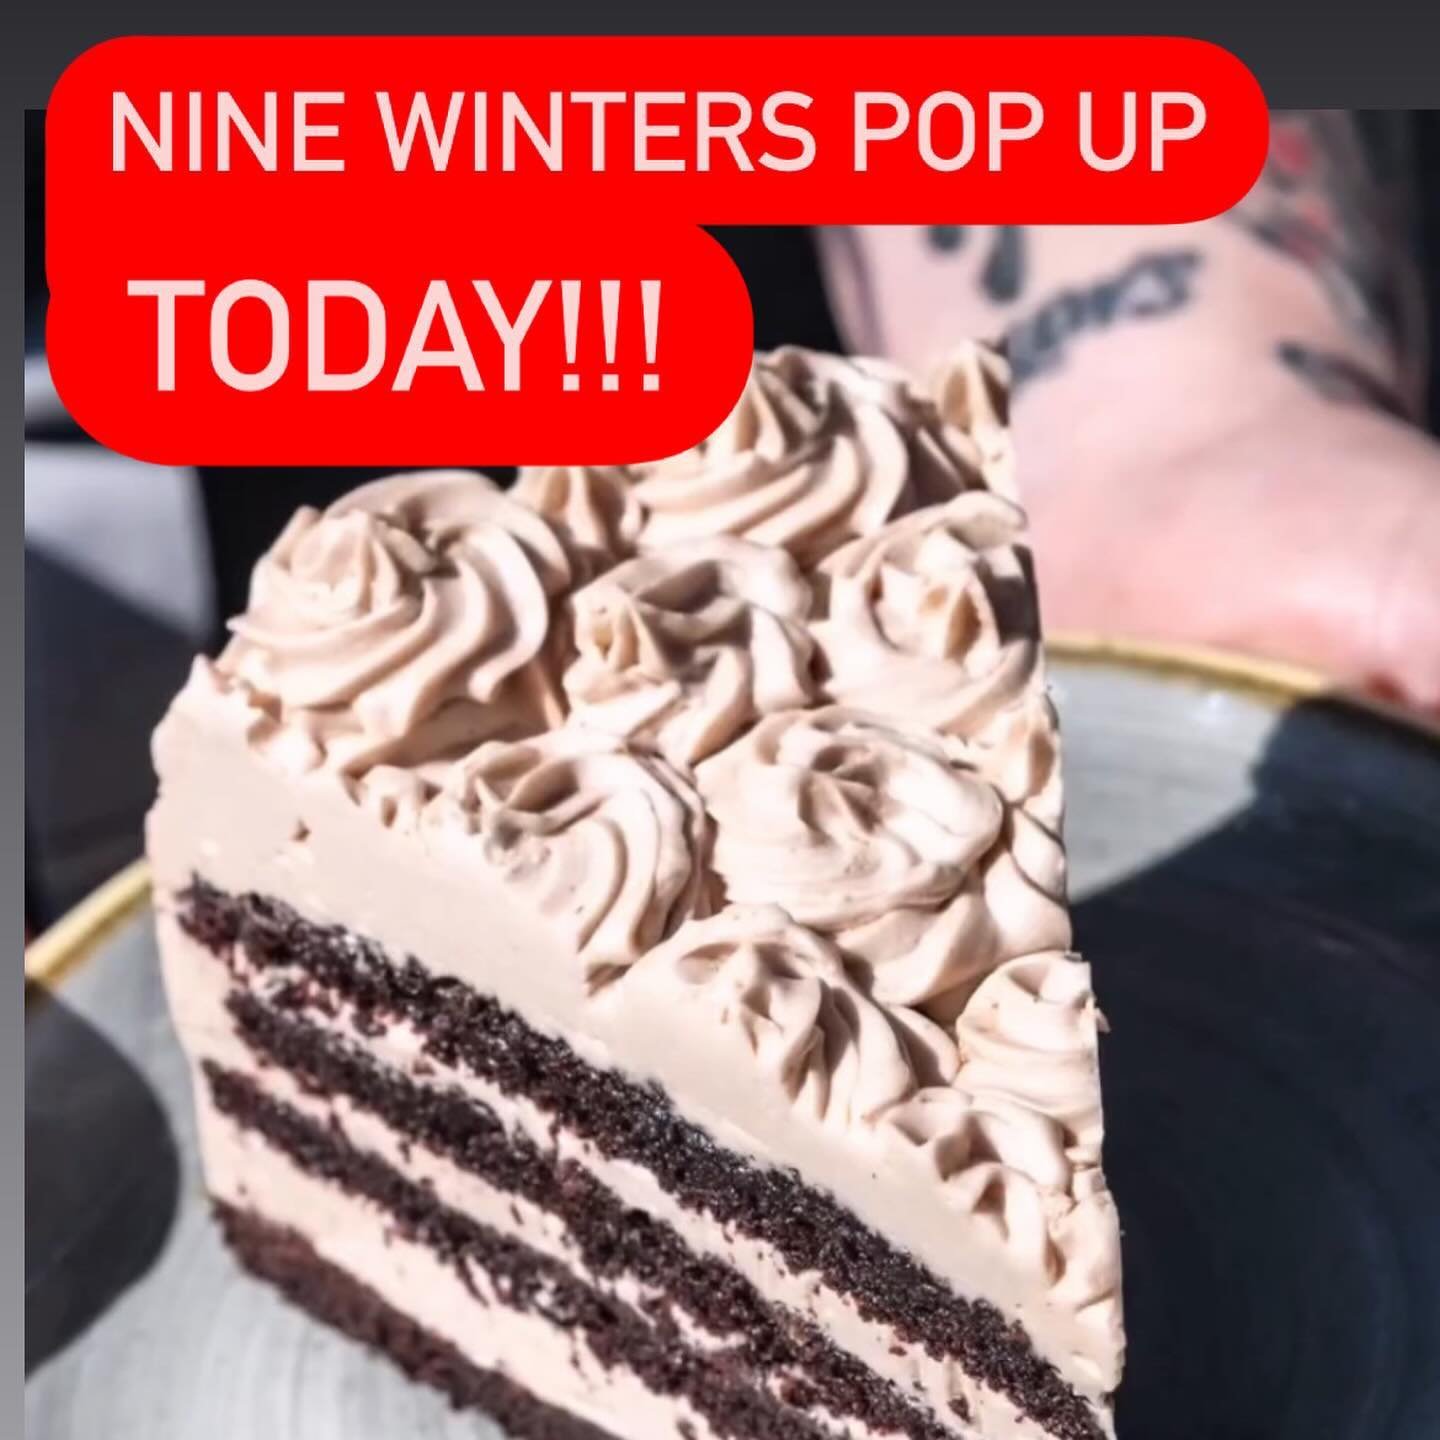 @ninewintersma will be in the shop today with slices of cake!
.
Lots of spring greens,
And
OF COURSE
LOTS
OF
MMOOOORRREEEELLLLLSSSSSS
.
Last week we ran out so this week we are pretty stacked and prices have dropped!
.
Burn morels are $15/quarter pou